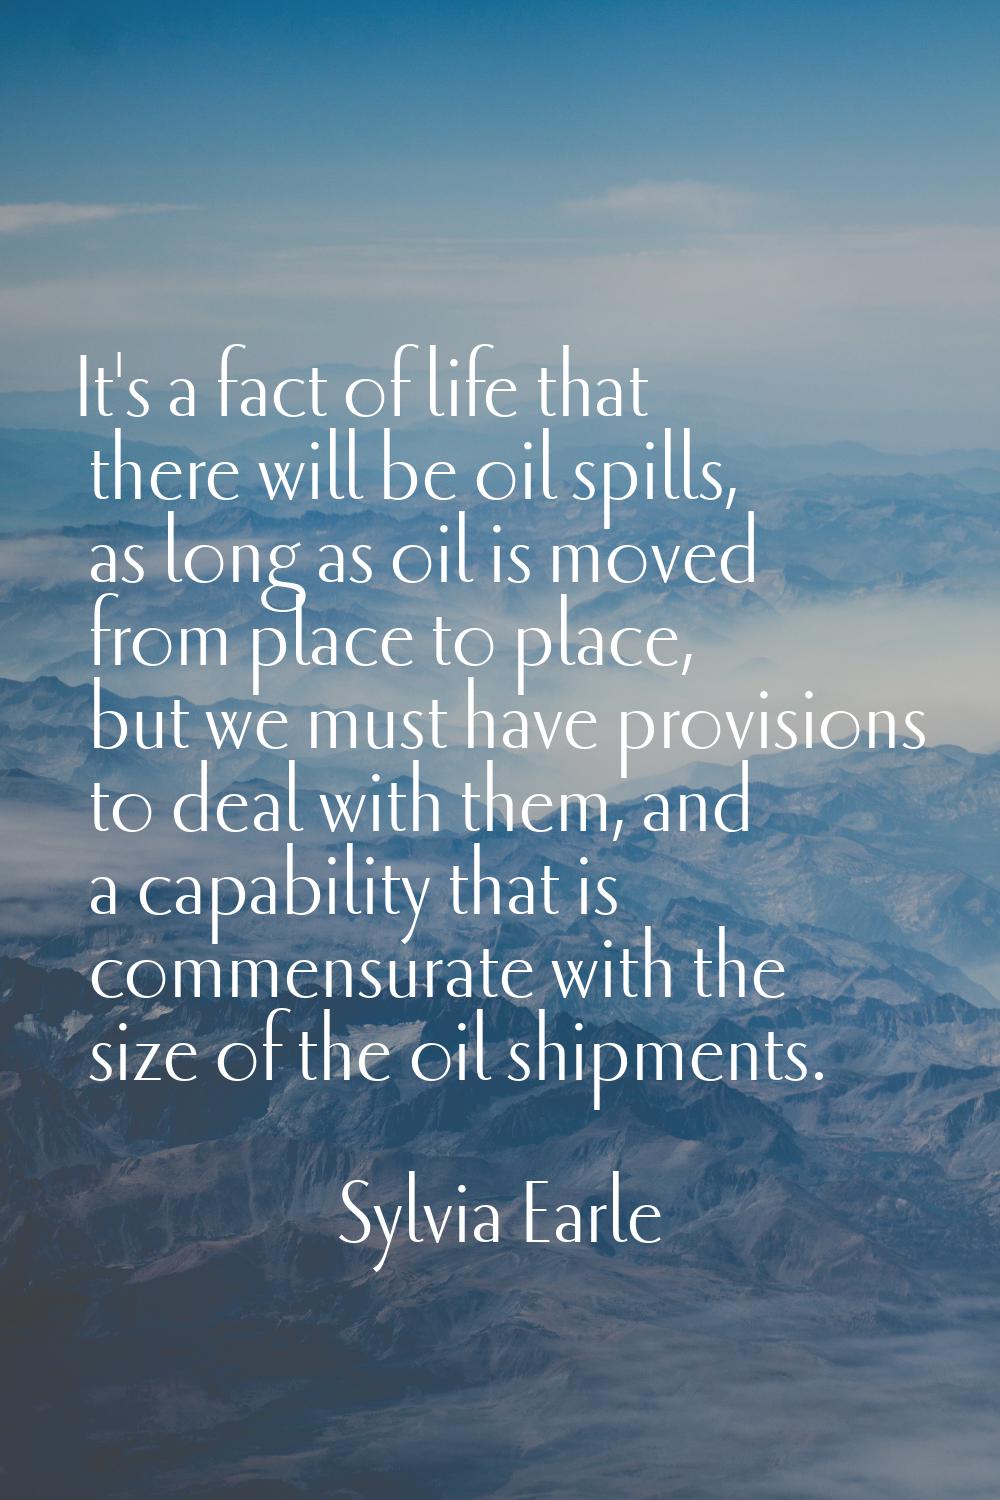 It's a fact of life that there will be oil spills, as long as oil is moved from place to place, but